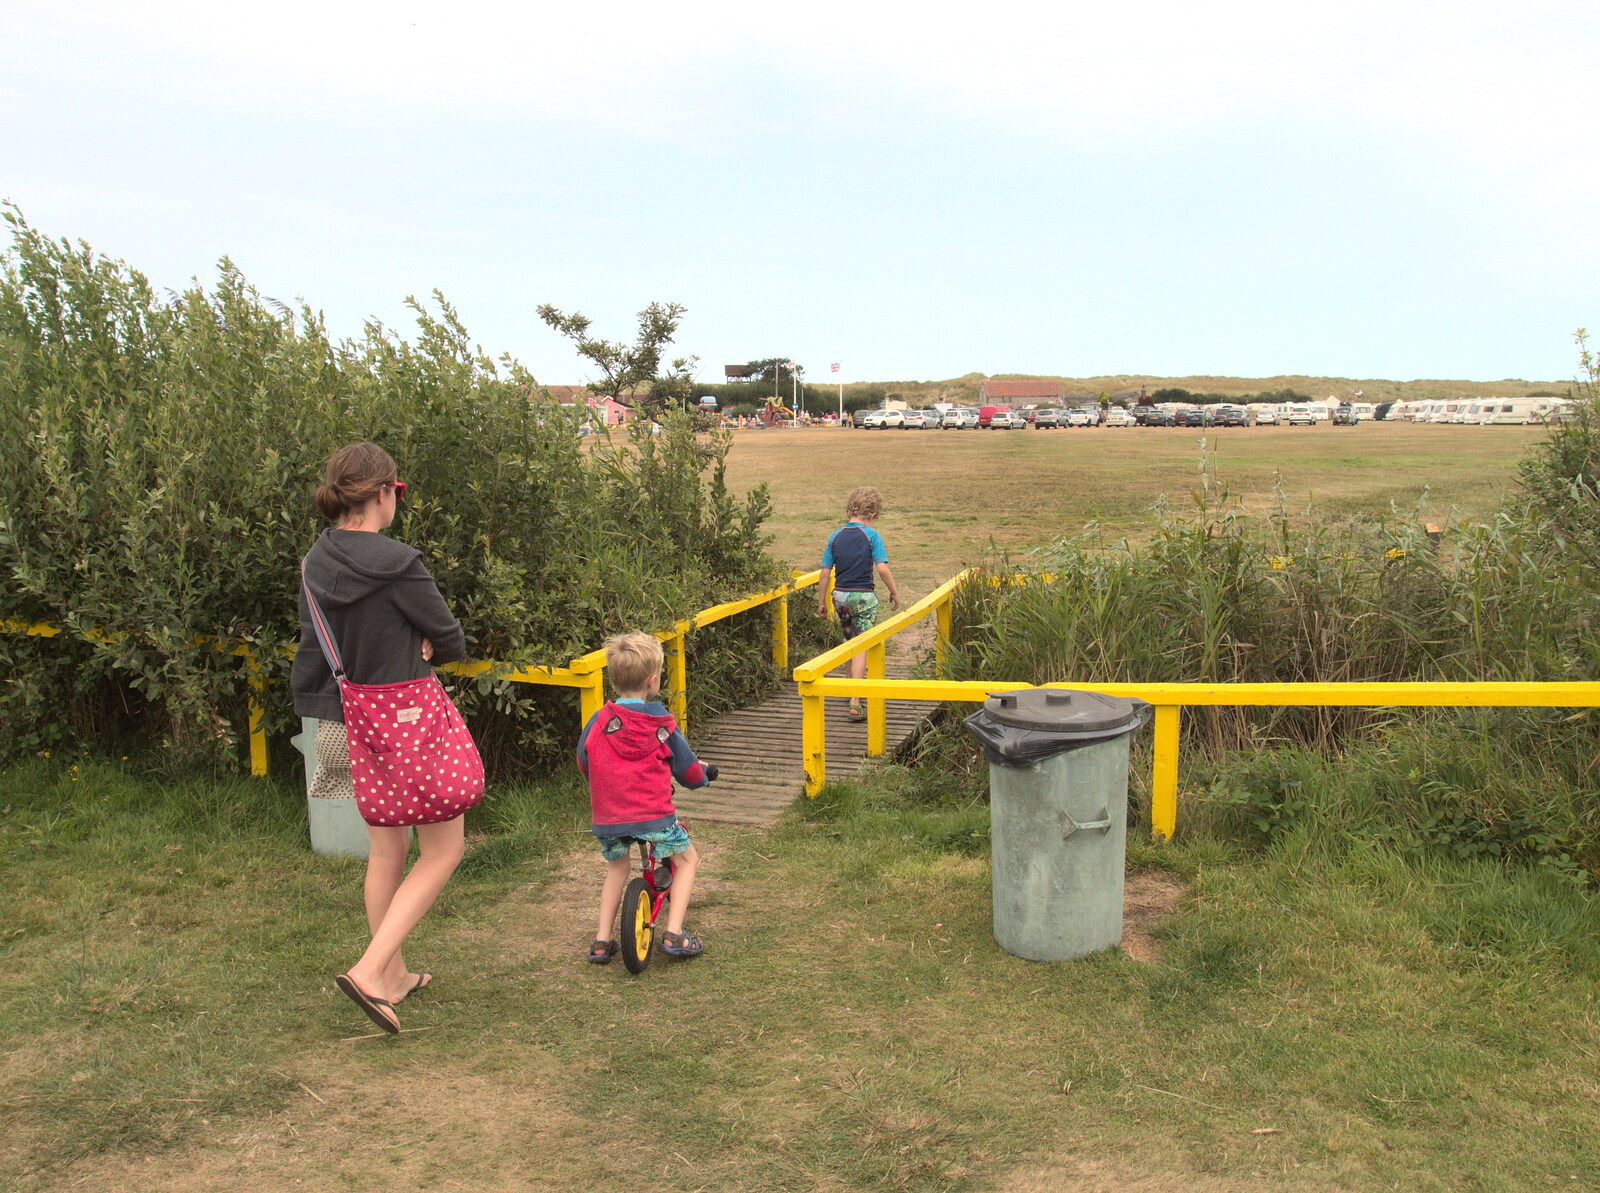 We head back to the campsite from A Trip to Waxham Sands,  Horsey, Norfolk - 27th August 2016